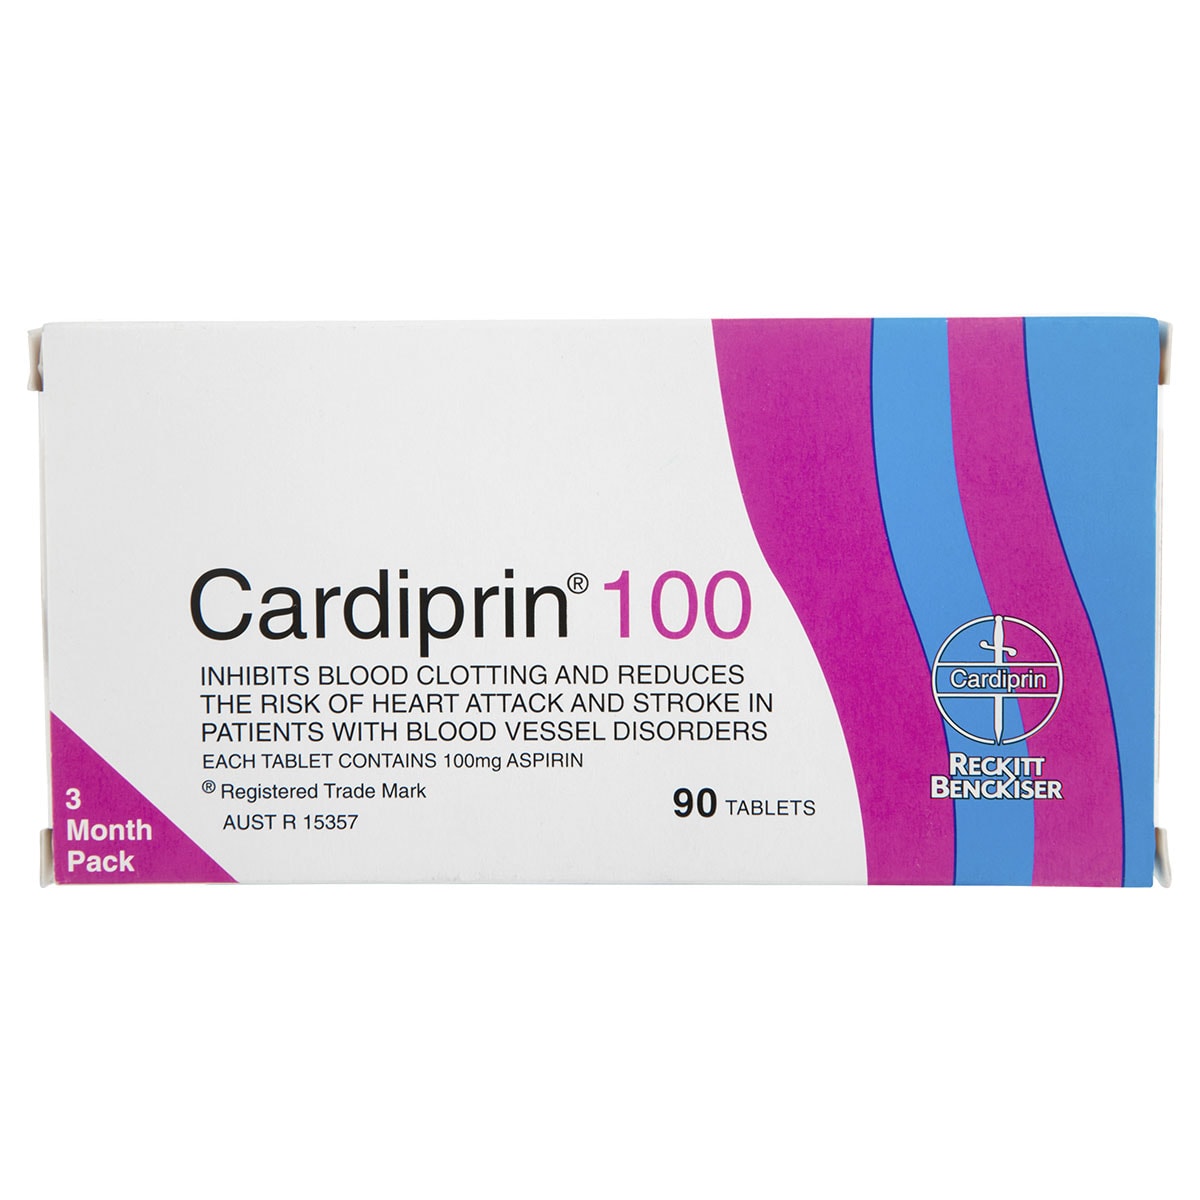 Cardiprin Blood Clotting Reduction Tablets 90 Pack